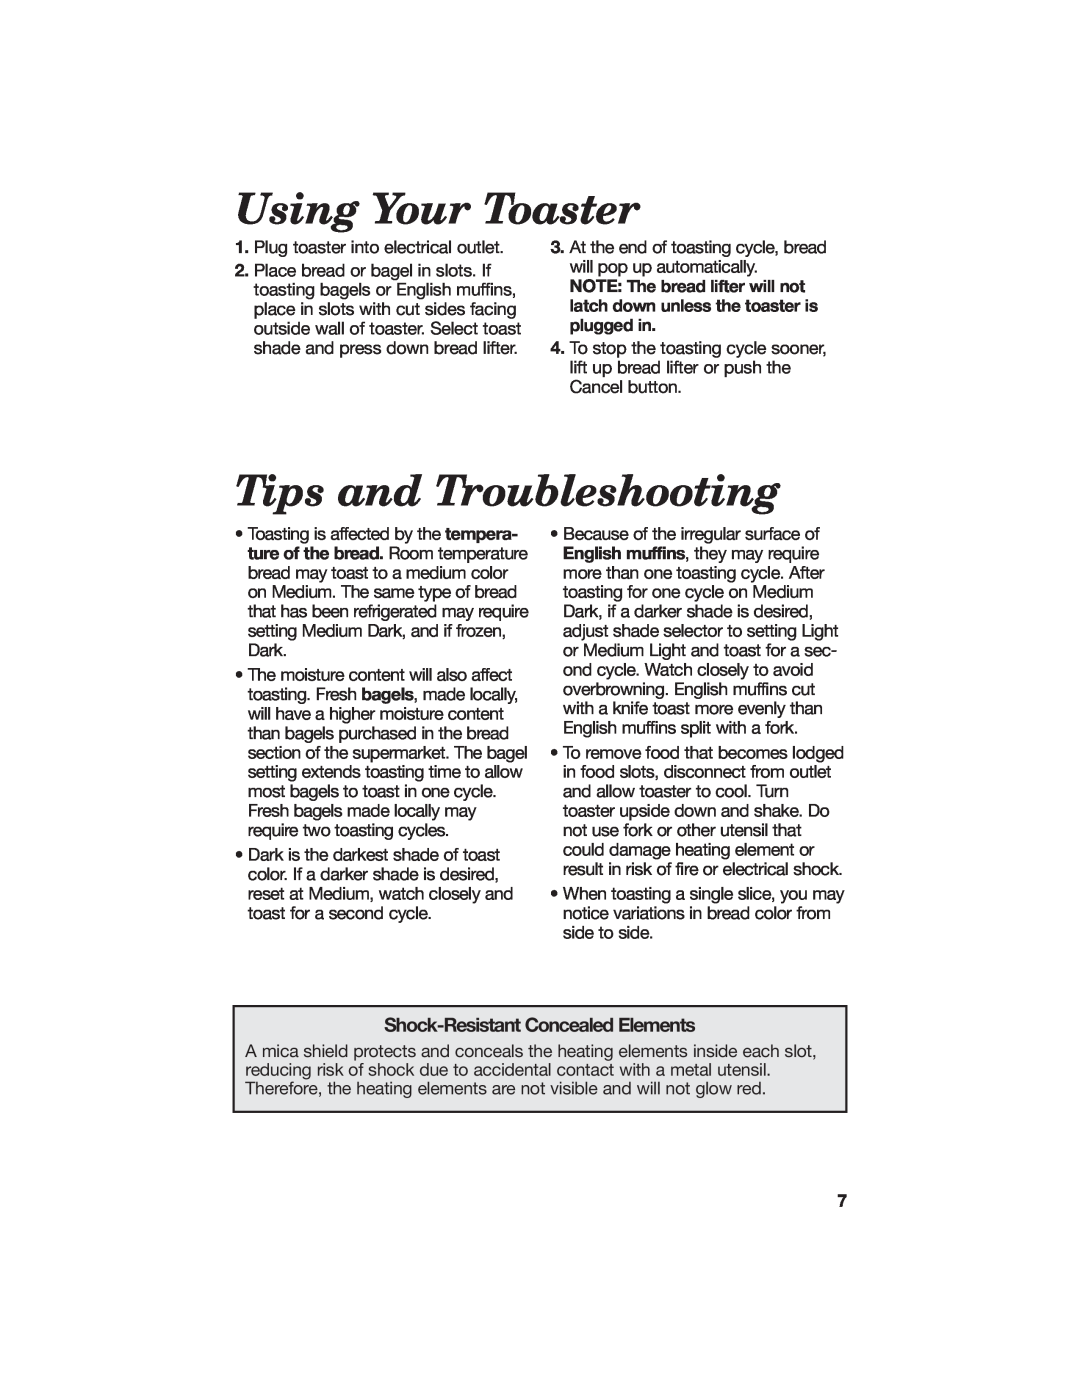 Hamilton Beach All-Metal Toaster manual Using Your Toaster, Tips and Troubleshooting, Shock-Resistant Concealed Elements 